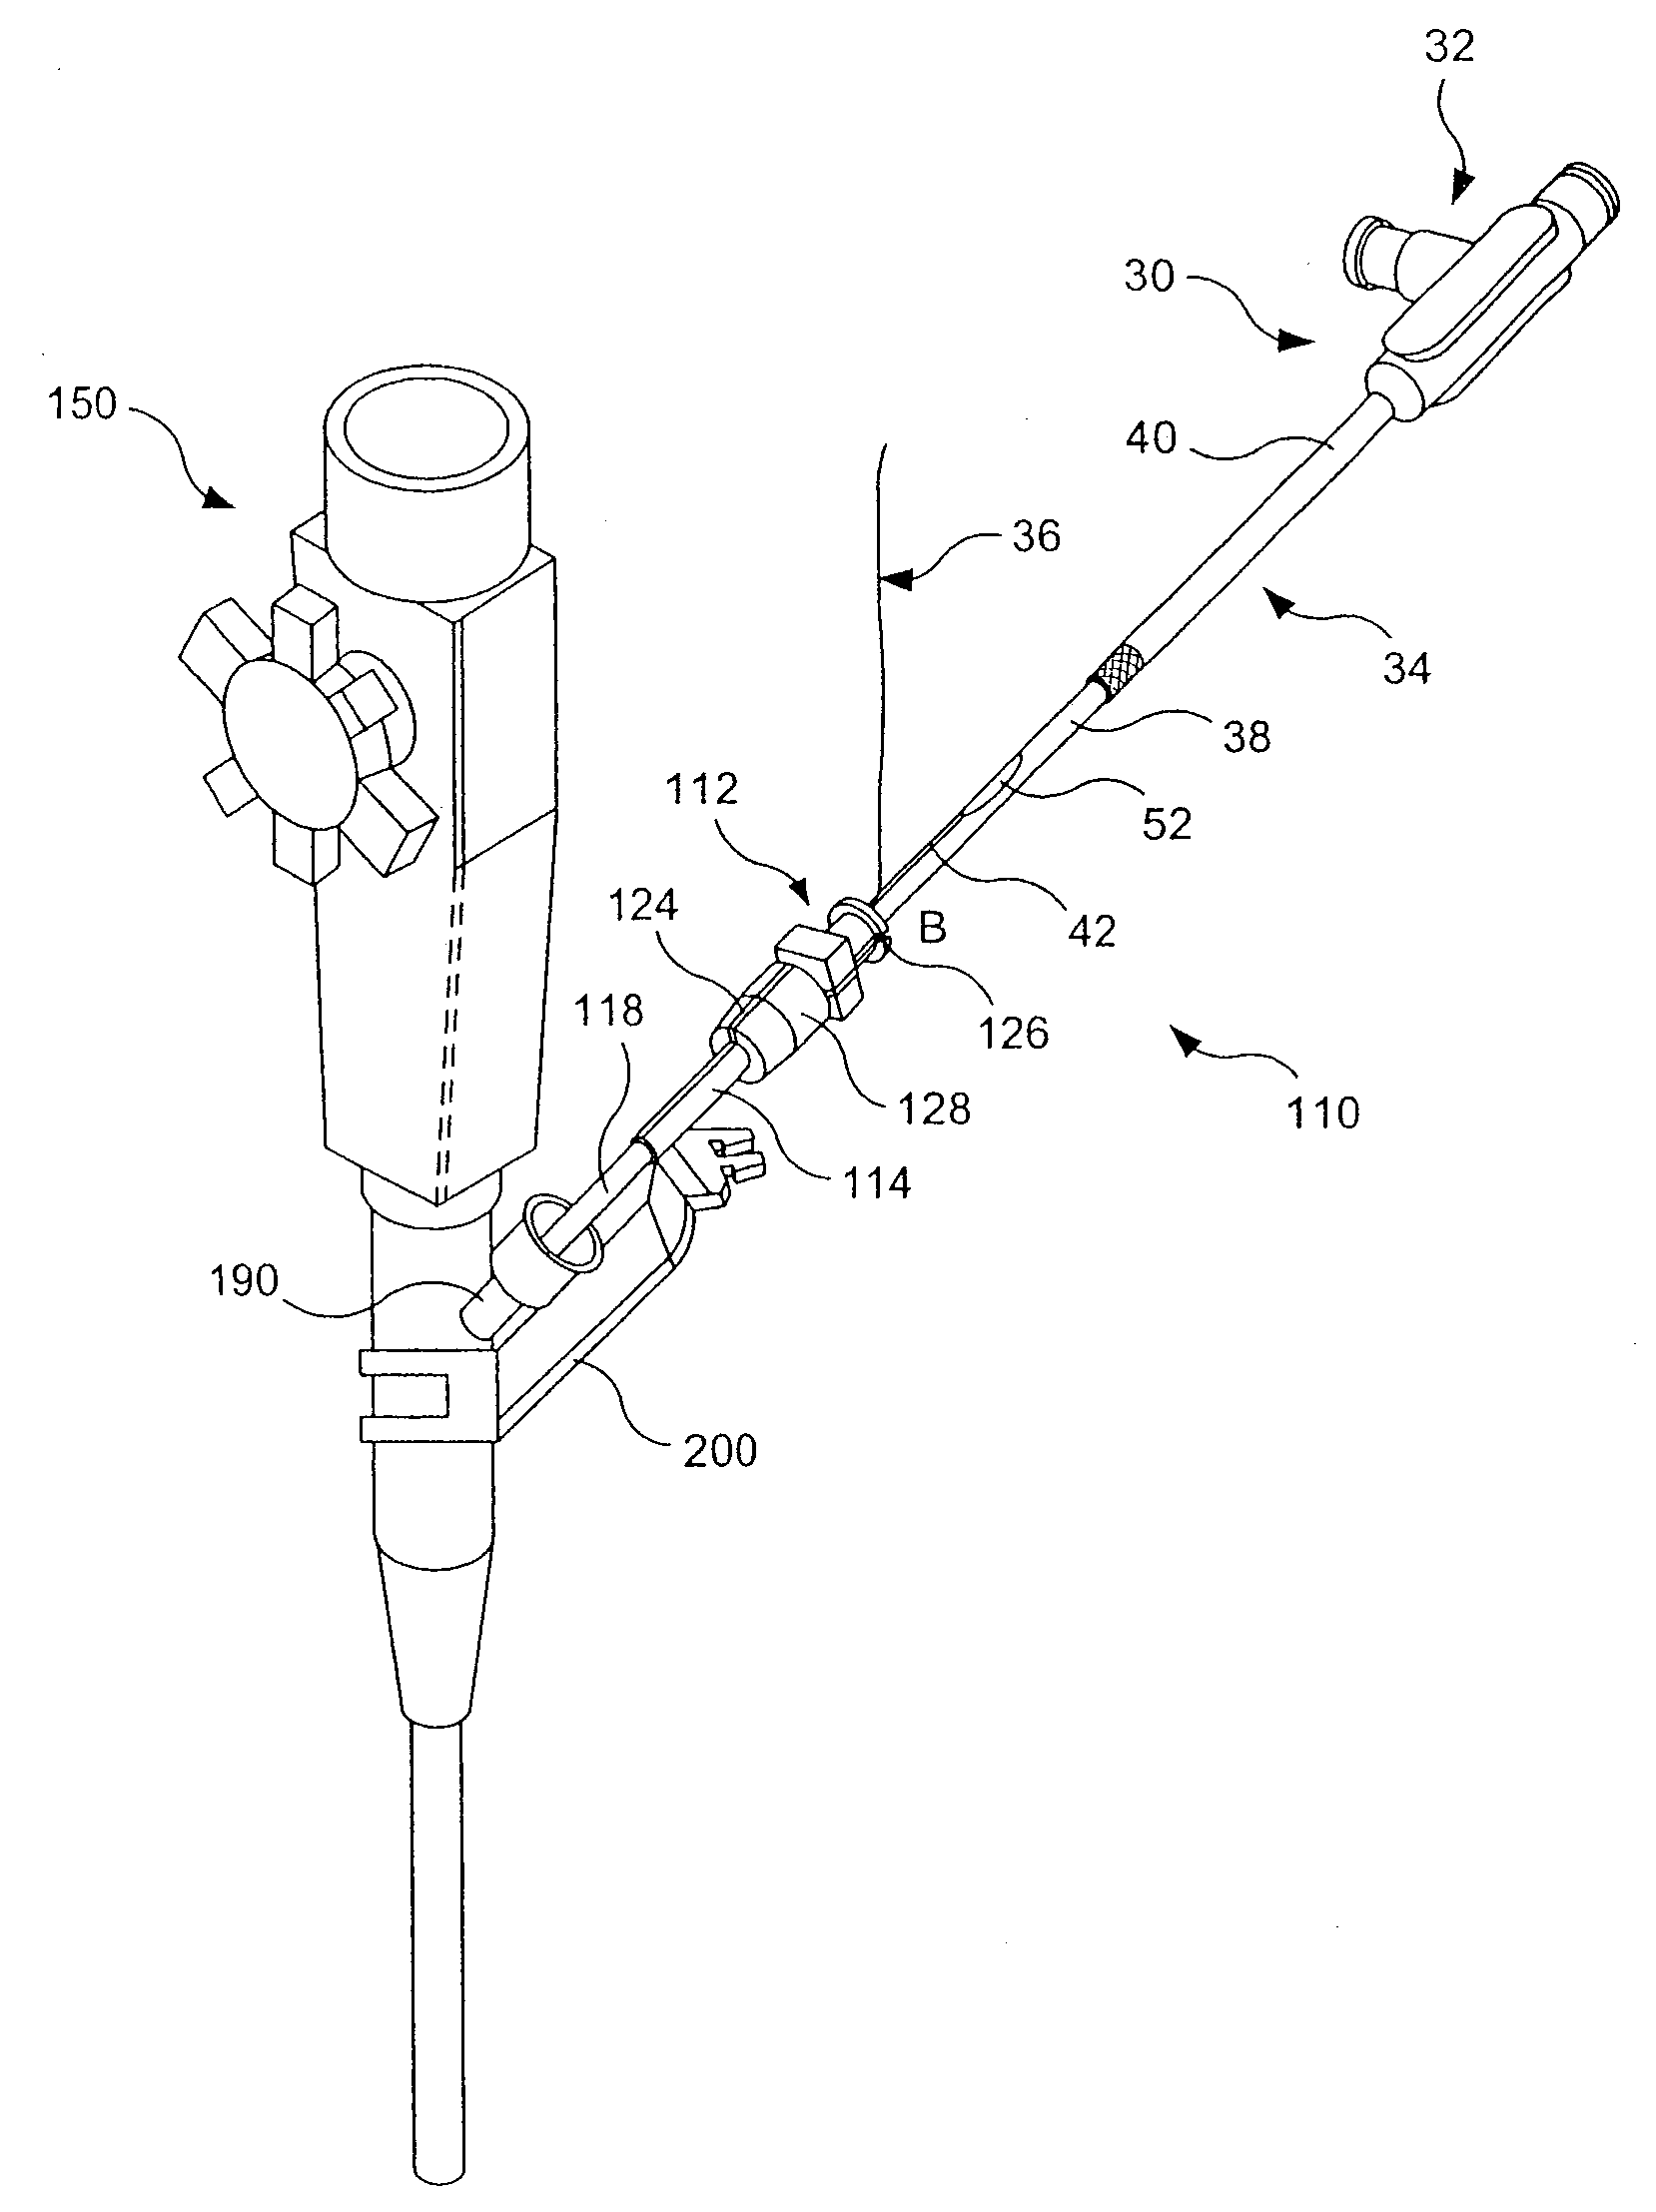 Guidewire Locking Device and Method